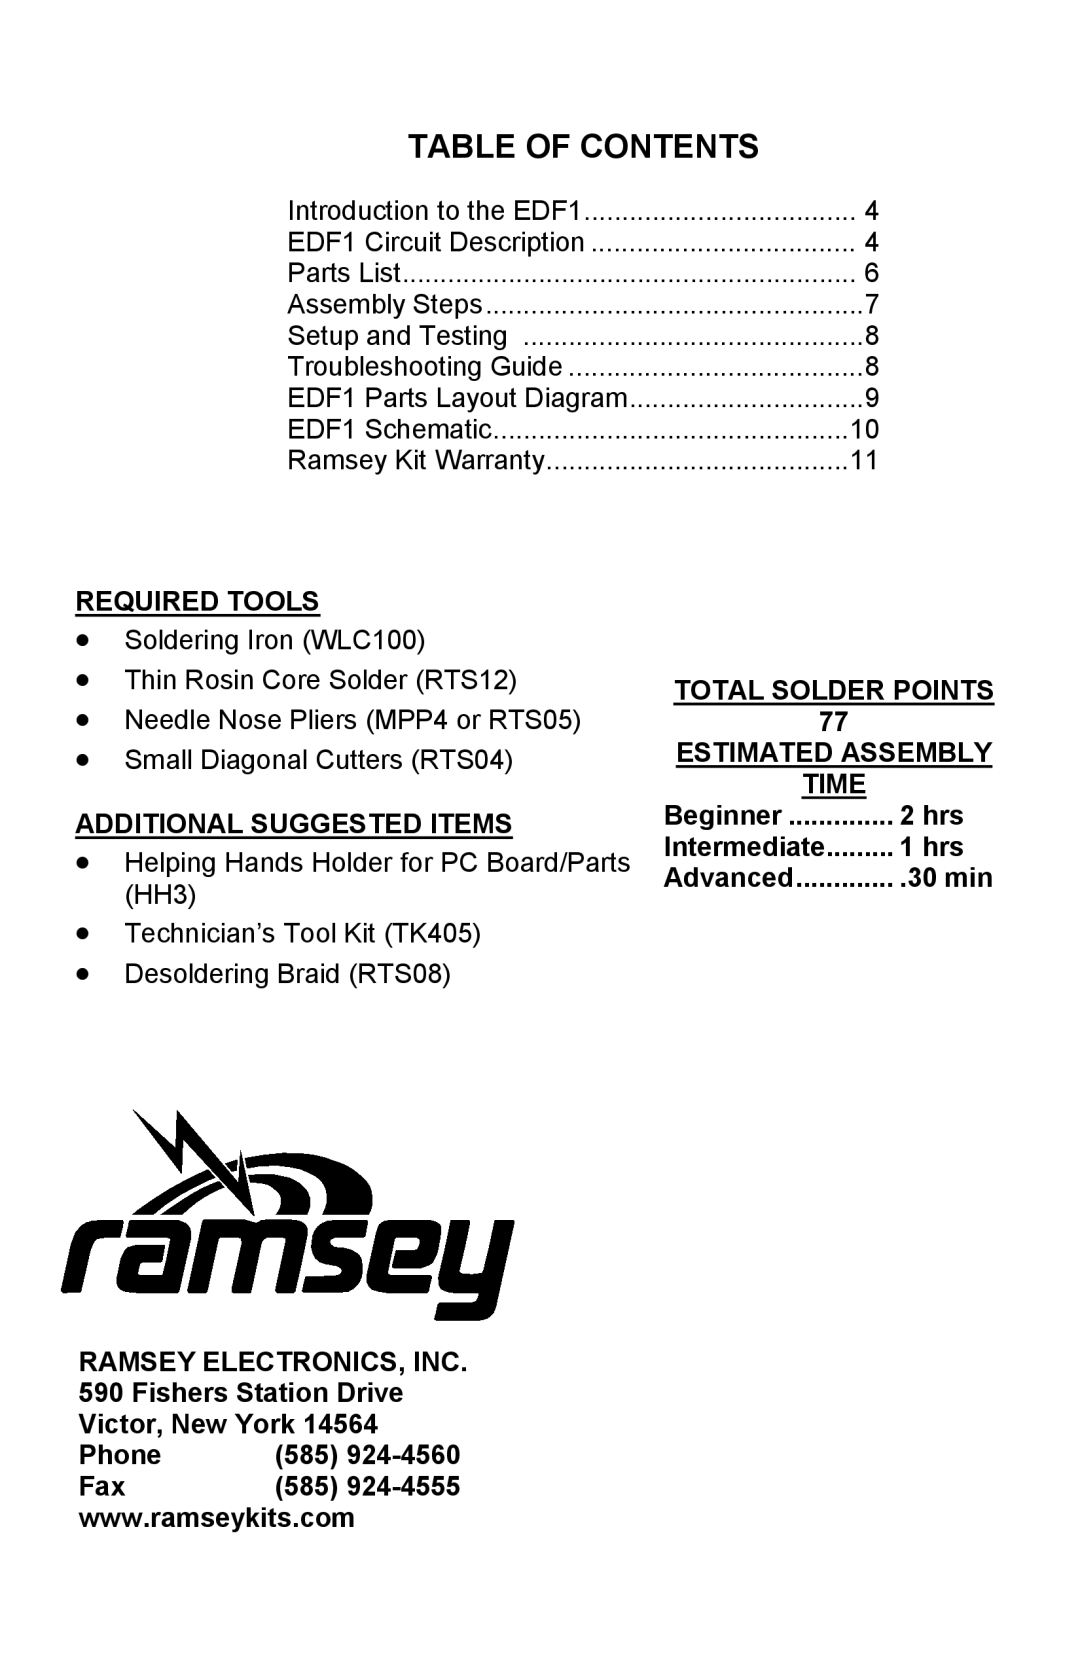 Ramsey Electronics EDF1 manual Table Of Contents, Required Tools, Additional Suggested Items, Victor, New York, Phone, Time 